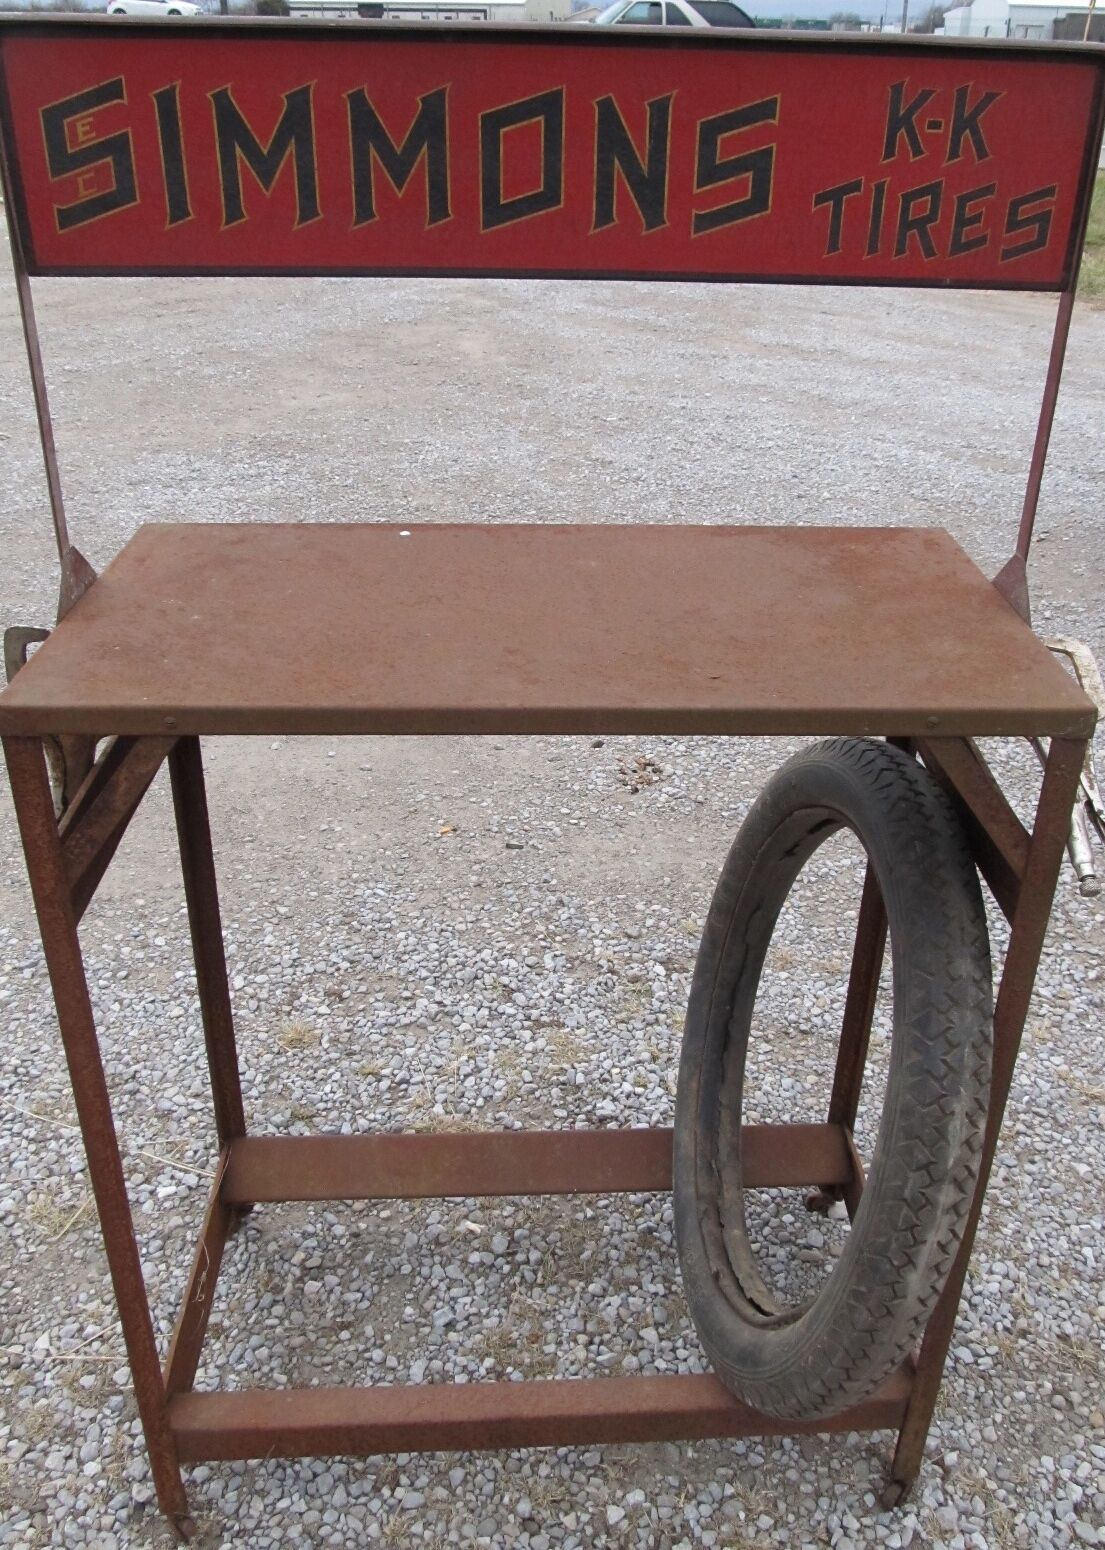 ANTIQUE KEEN KUTTER TIRE RACK GENERAL STORE DISPLAY EC Simmons Co St. Louis Mo